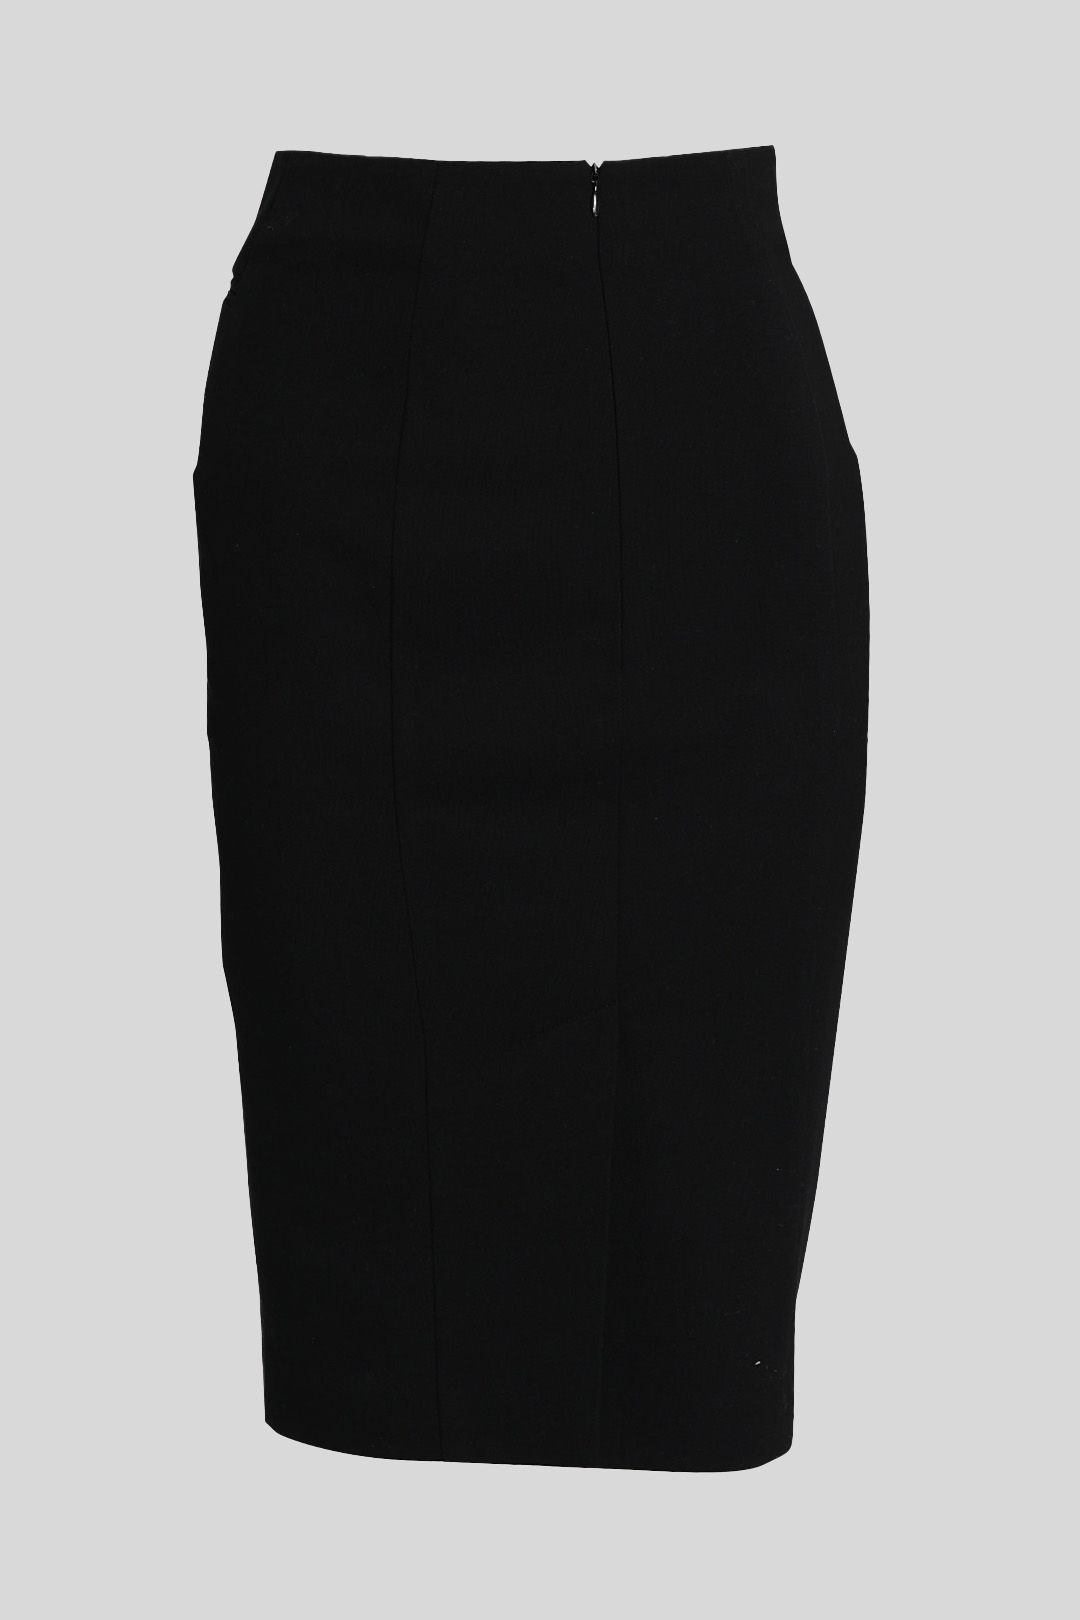 Cue Tailored Pencil Skirt in Black